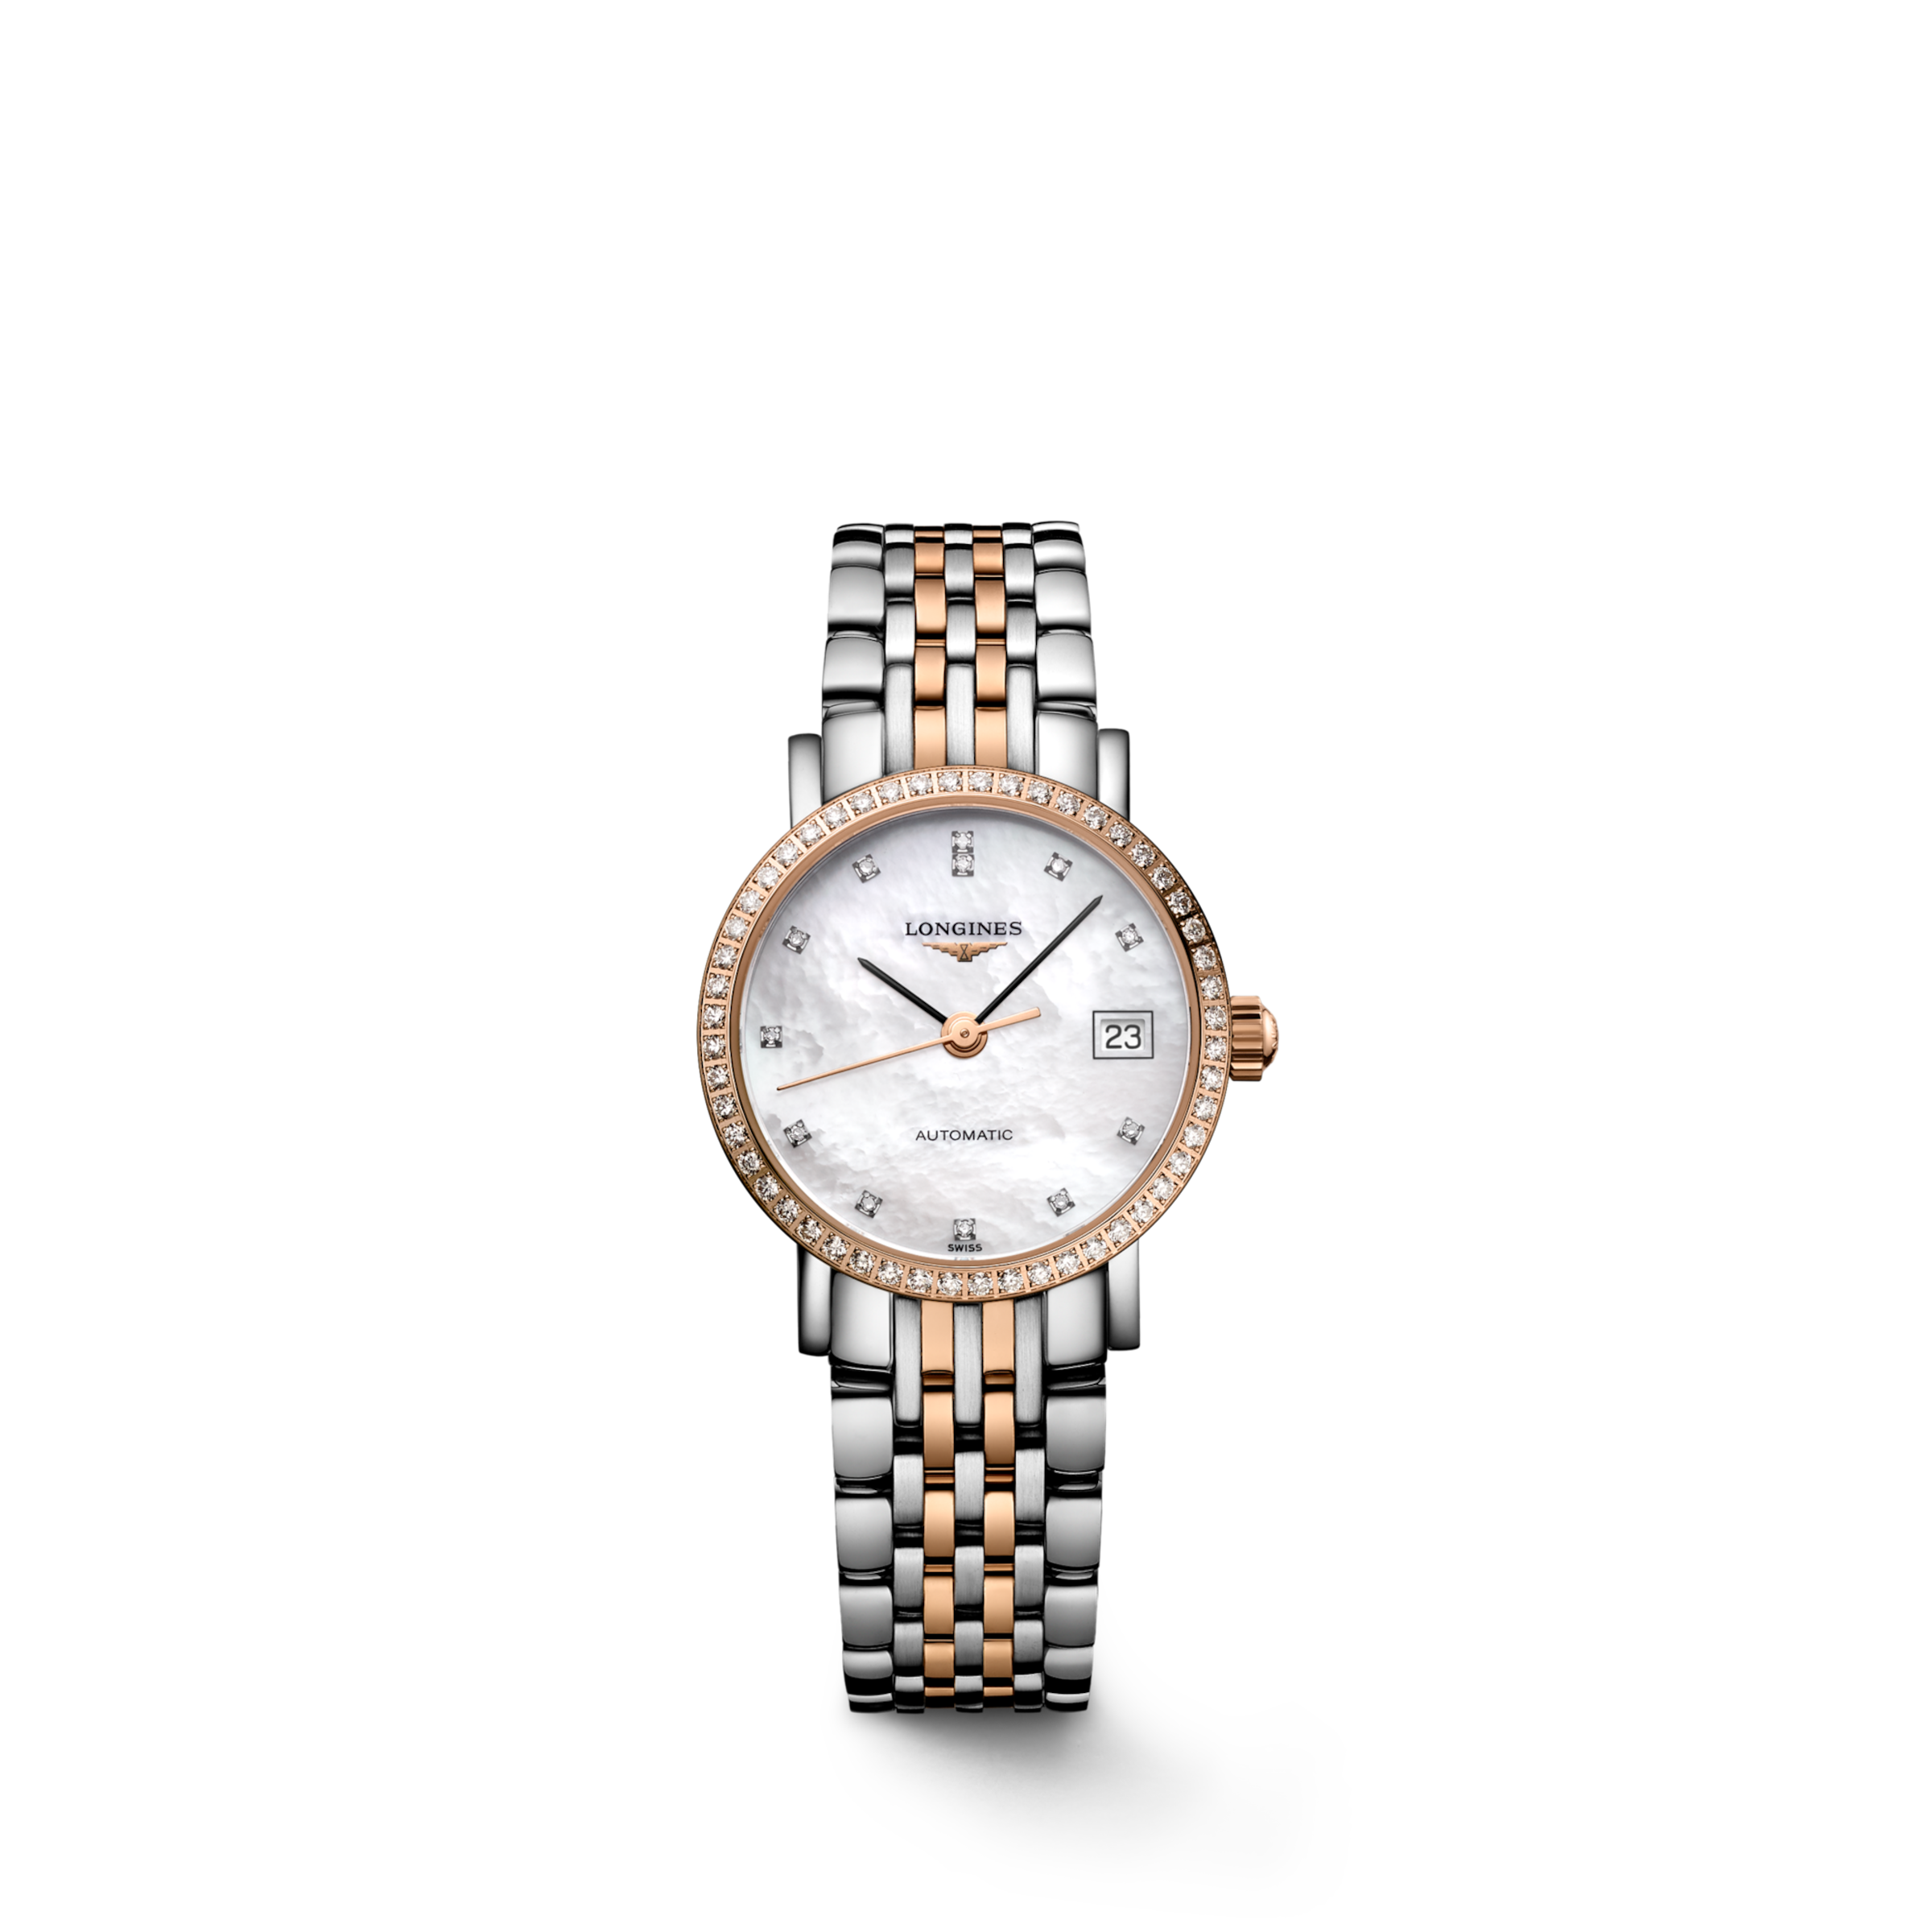 Longines ELEGANT COLLECTION Automatic Stainless steel and 18 karat pink gold Watch - L4.309.5.88.7